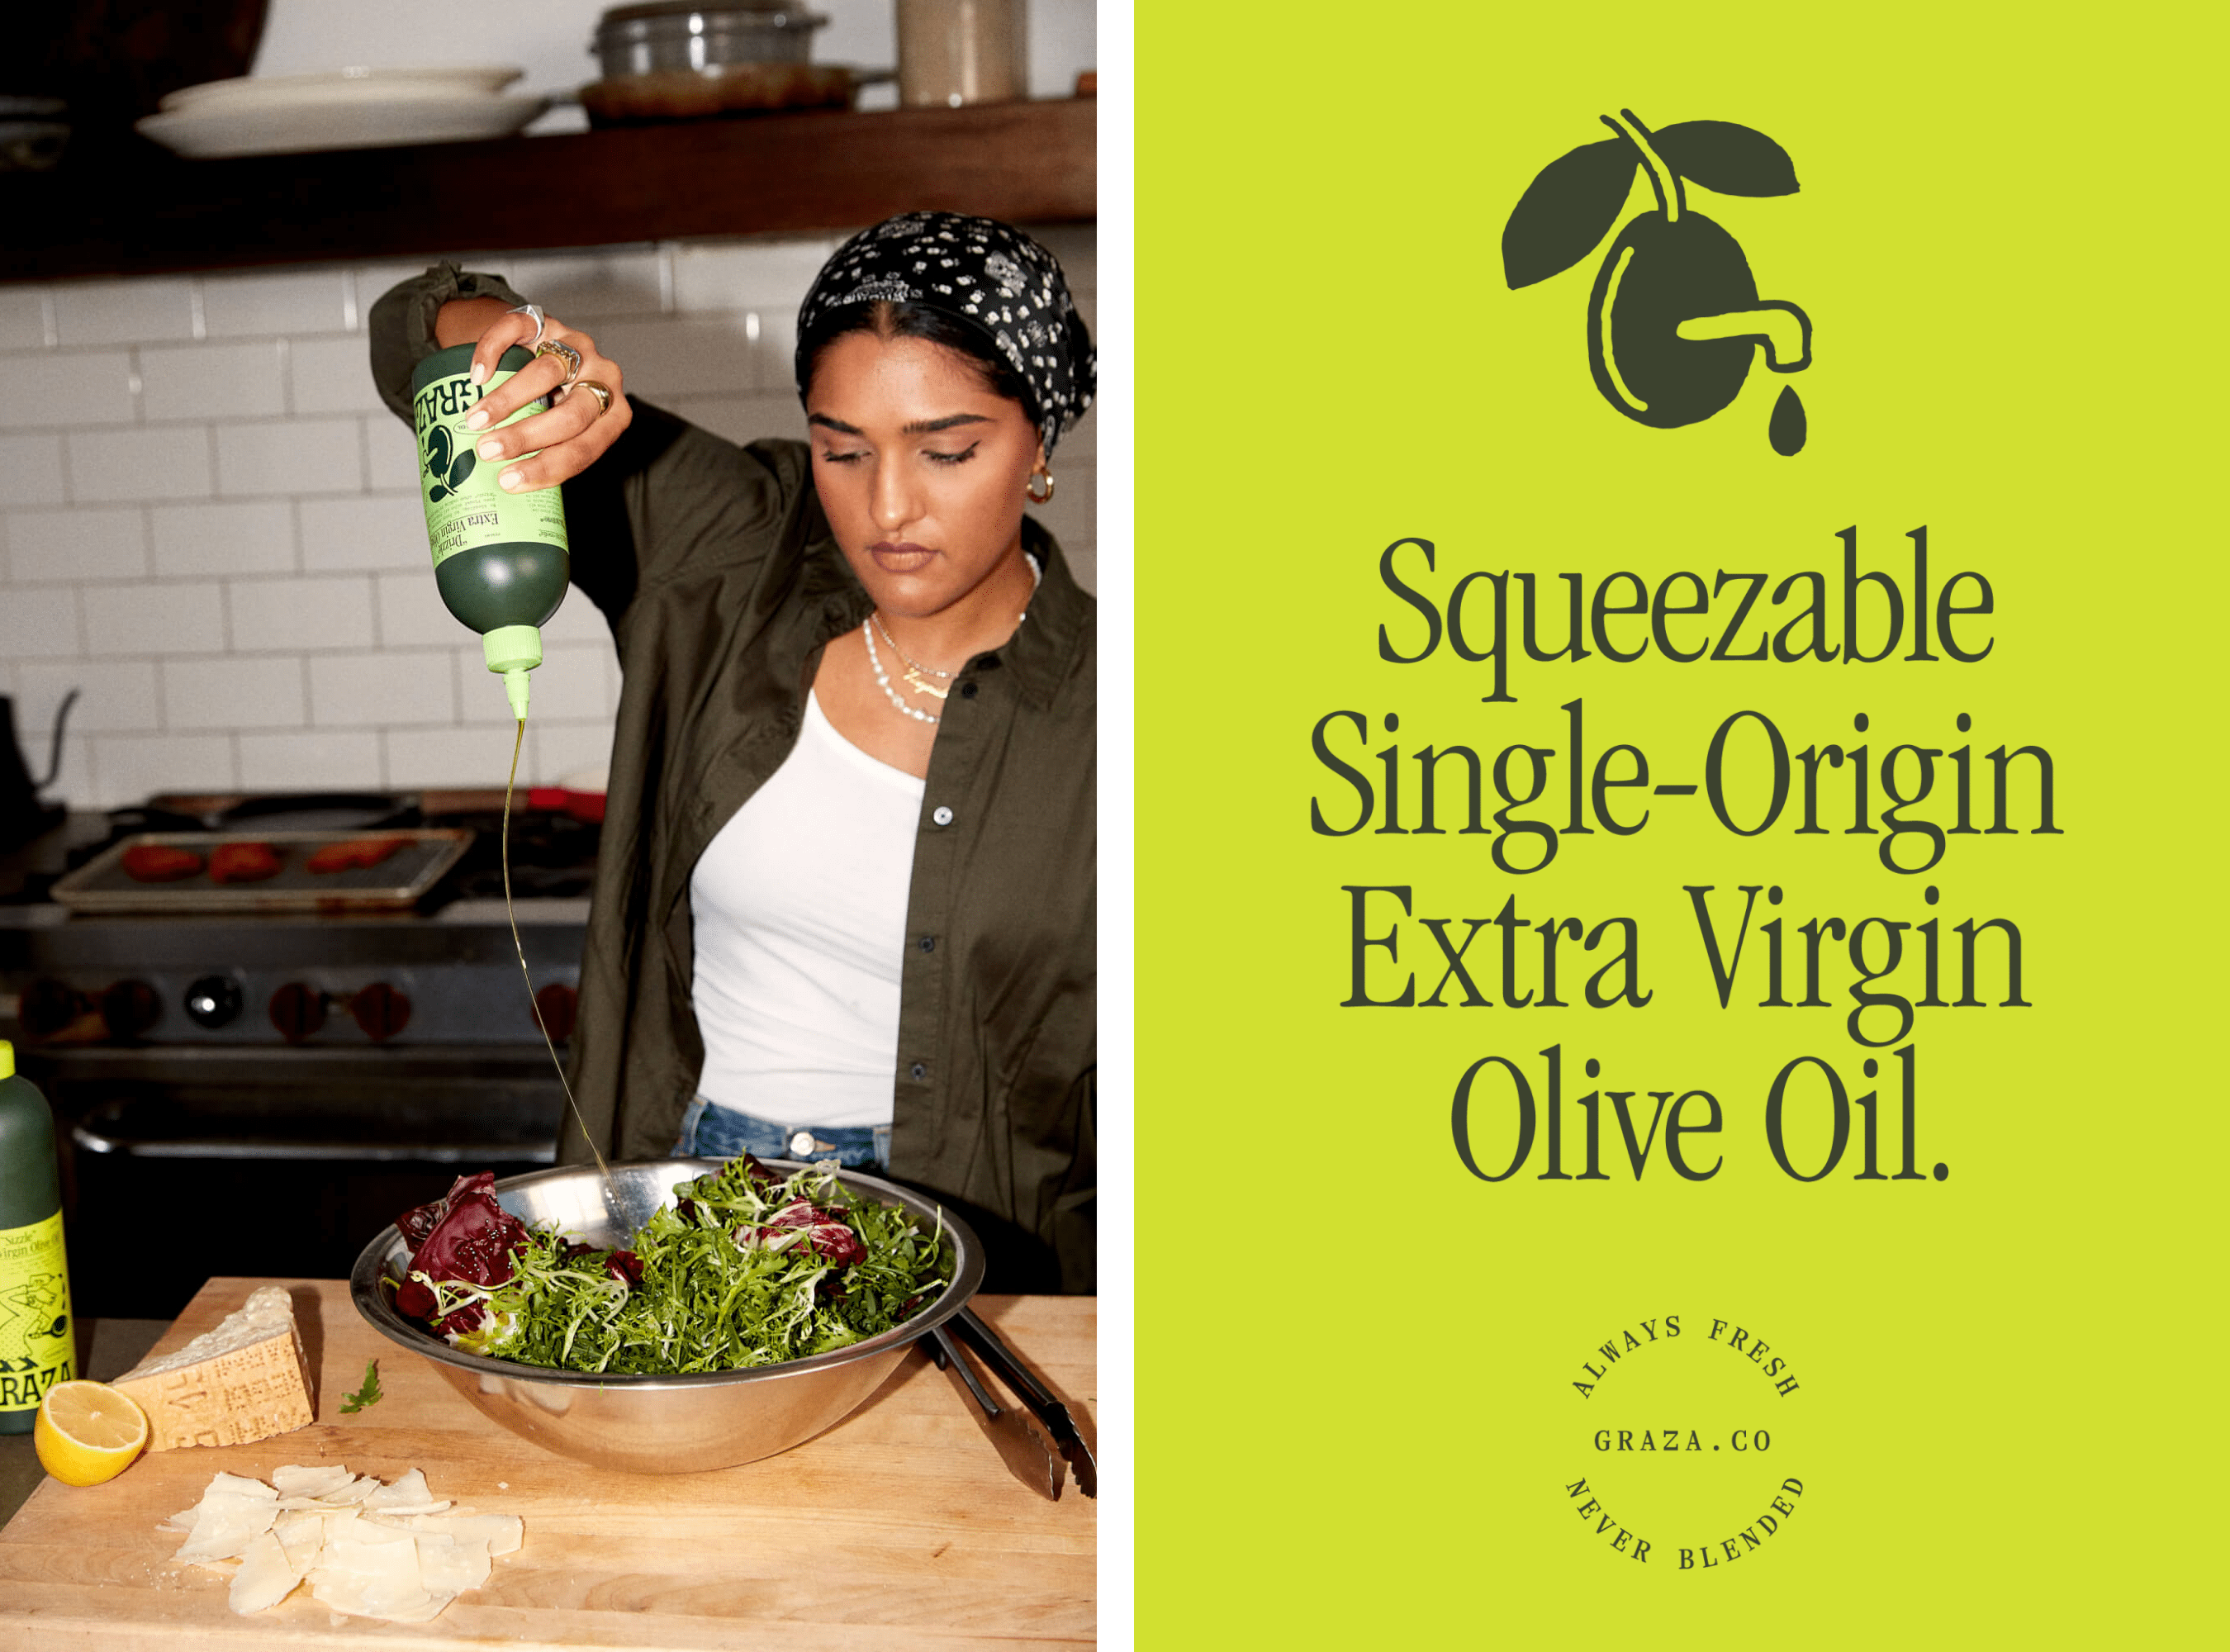 Brand and art direction by Gander for squeezable single origin olive oil Graza